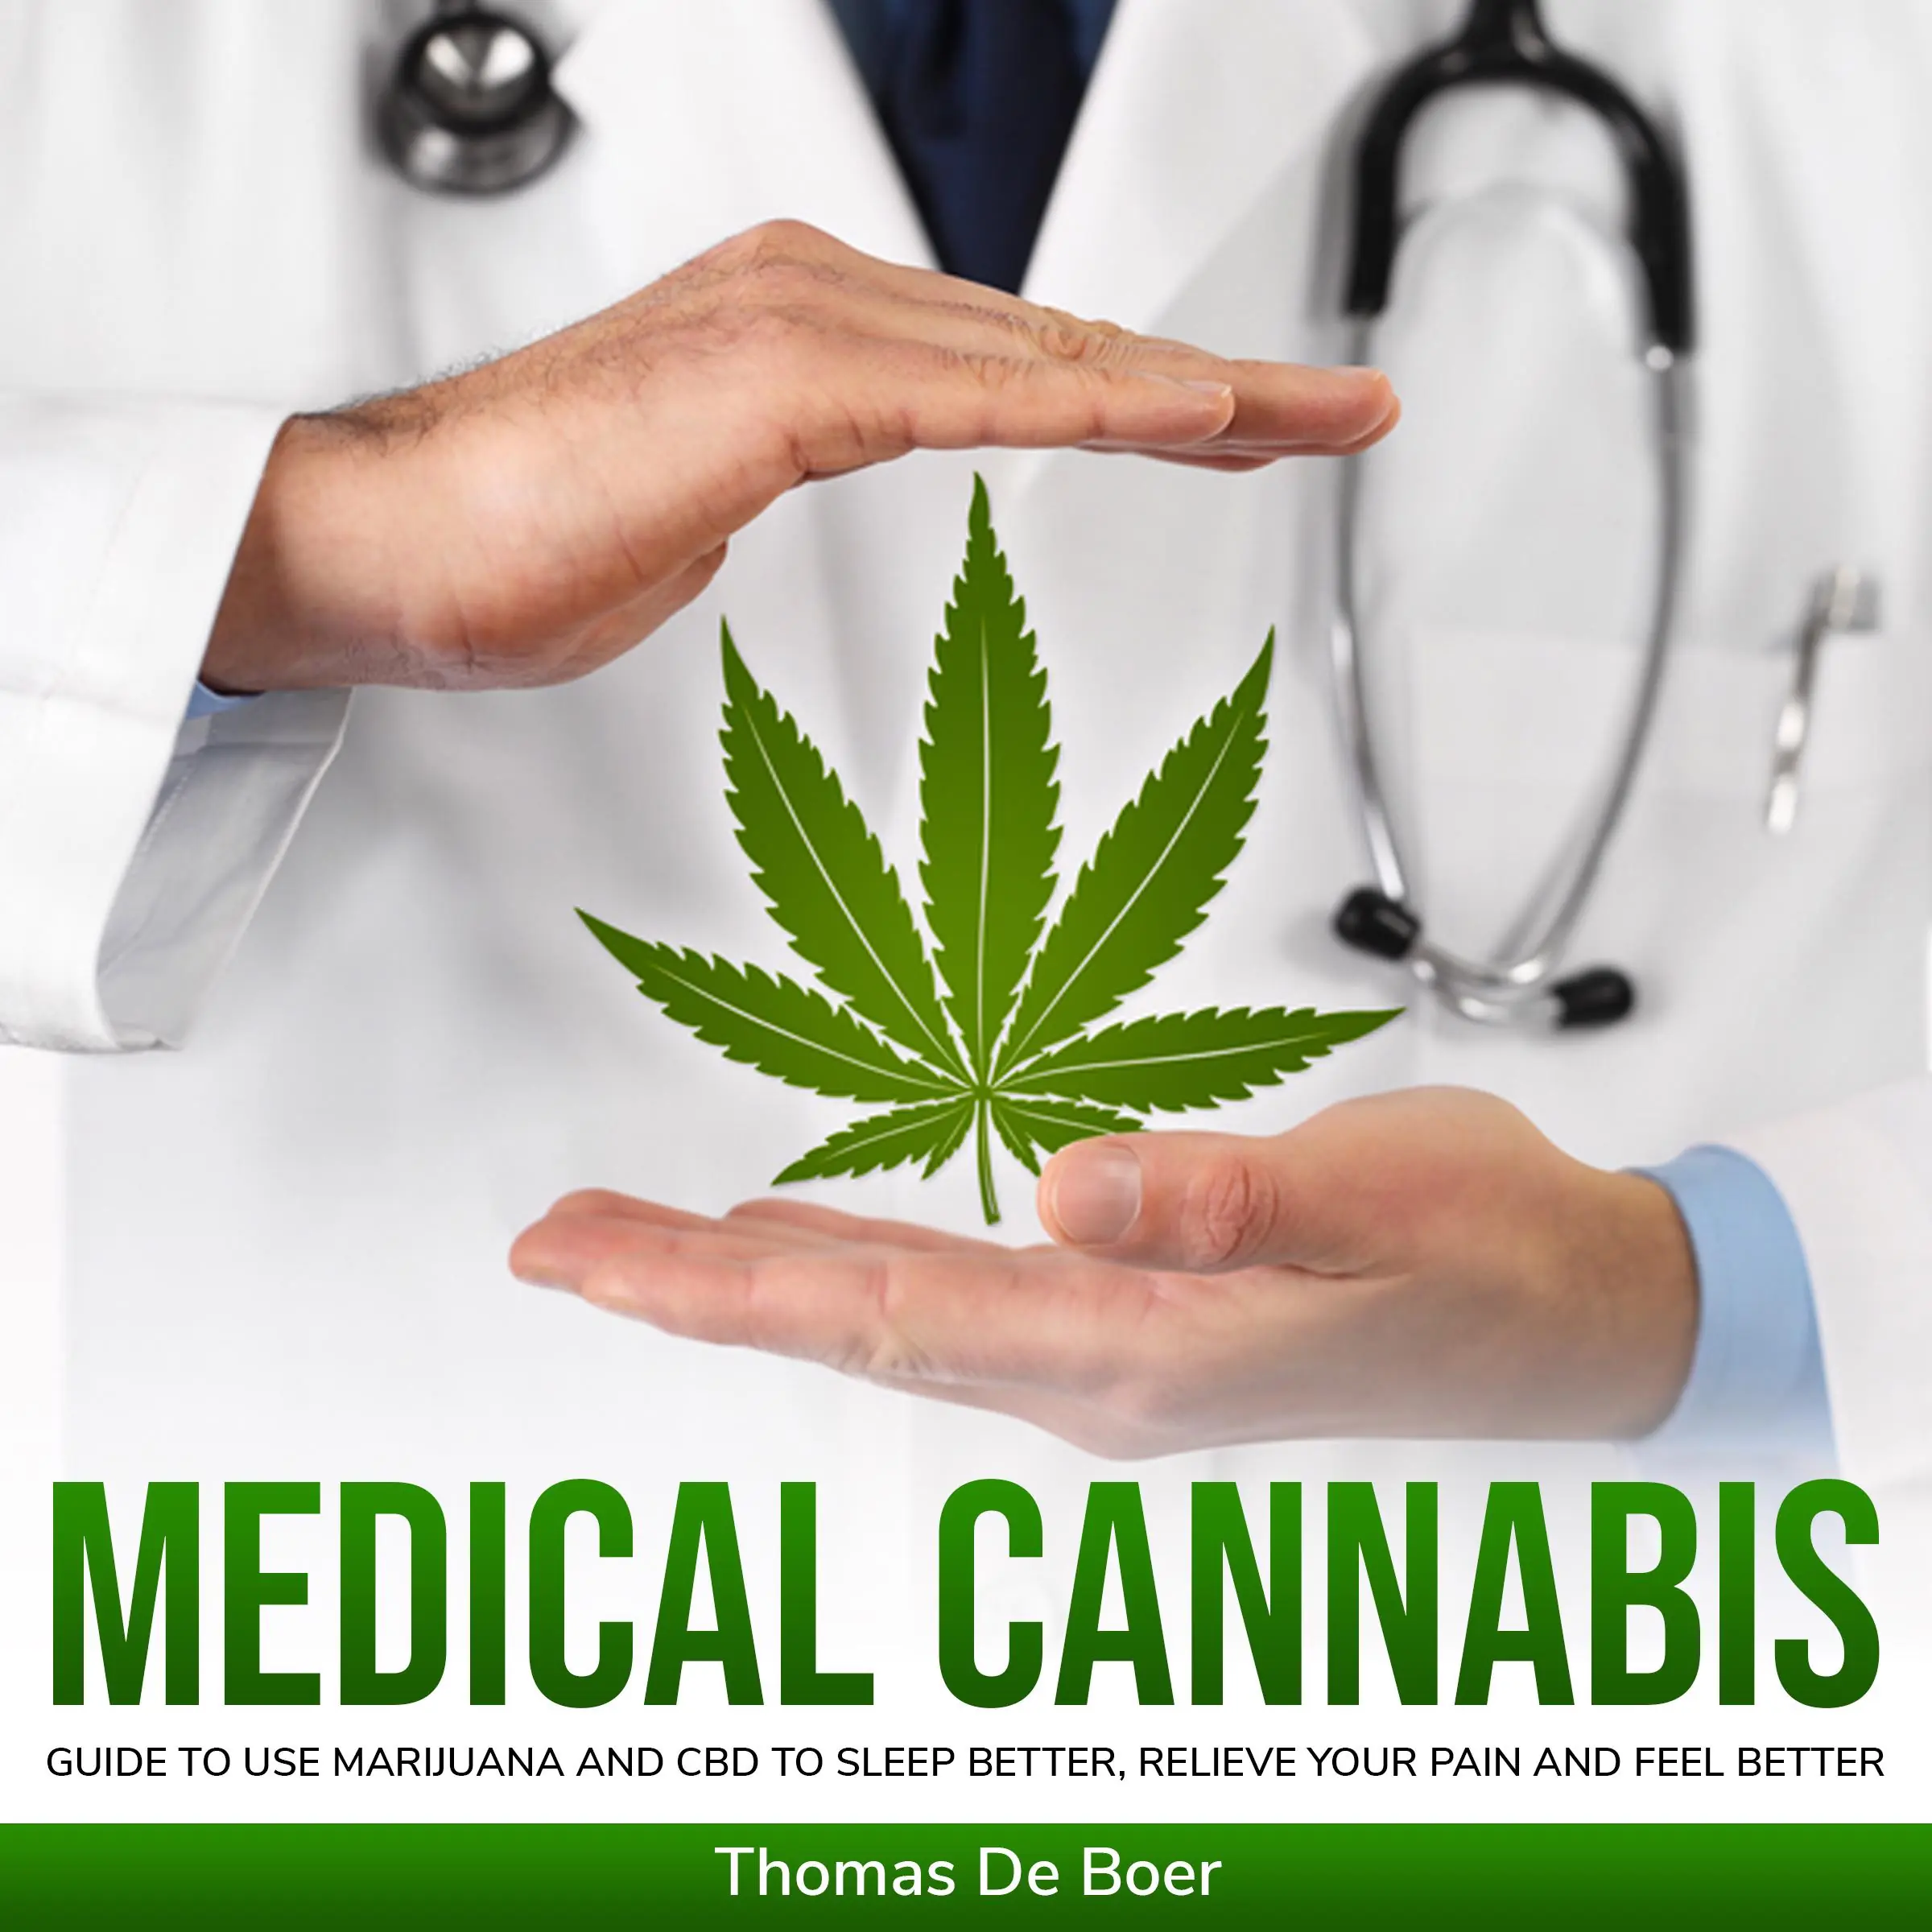 MEDICAL CANNABIS: Guide to Use Marijuana and CBD to Sleep Better, Relieve Your Pain and Feel Better Audiobook by Thomas De Boer